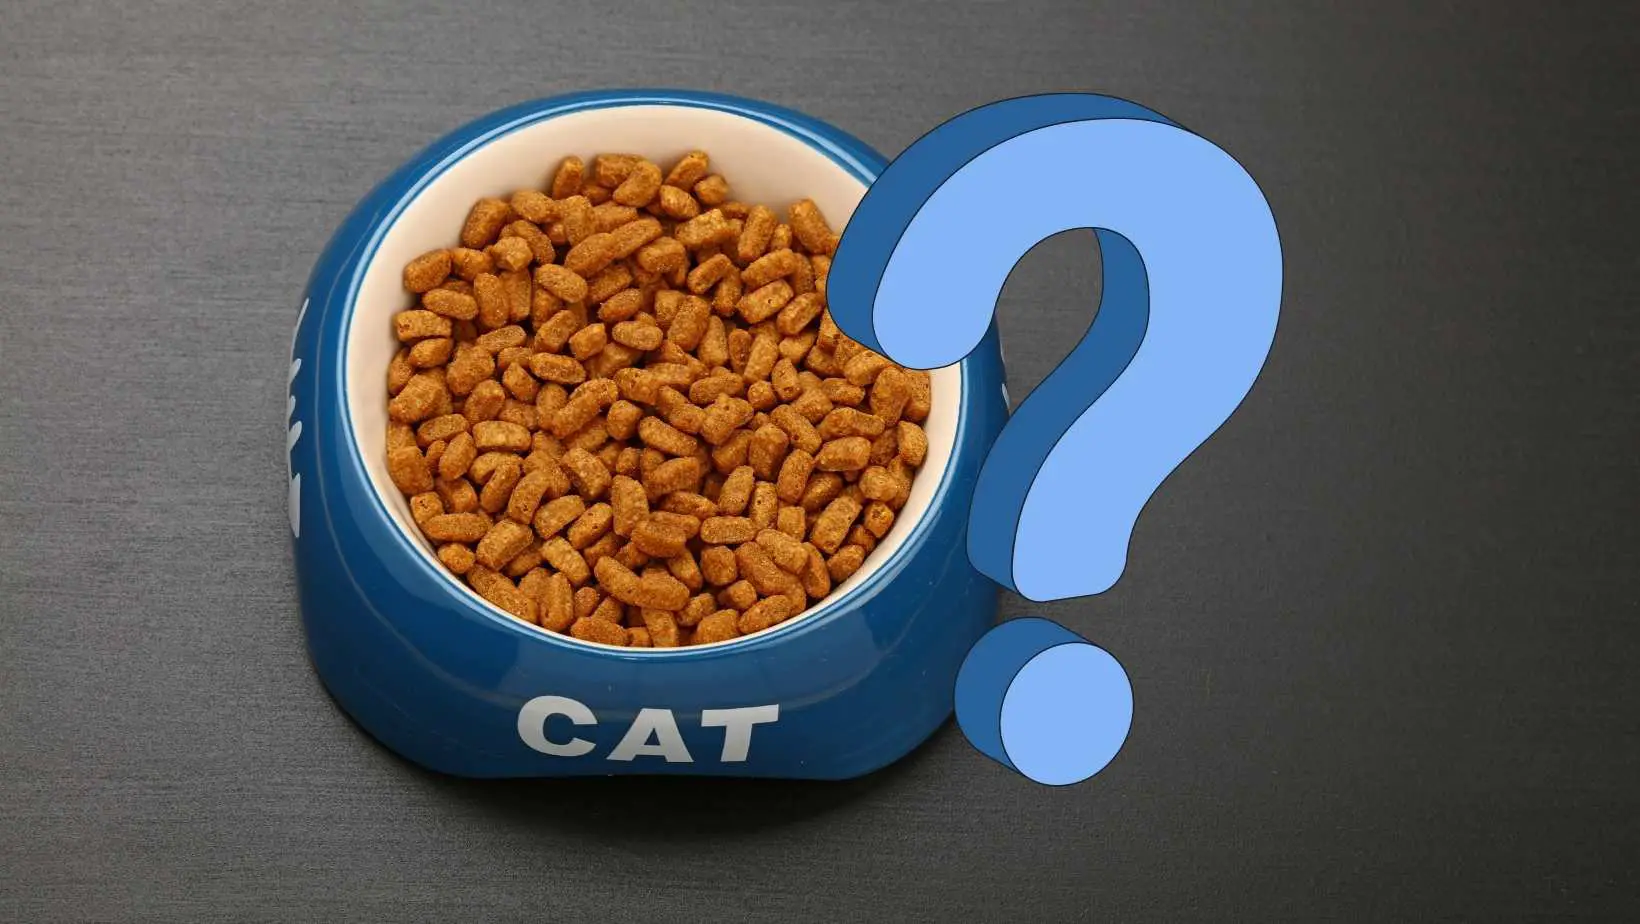 What You Need to Know About Cat Food